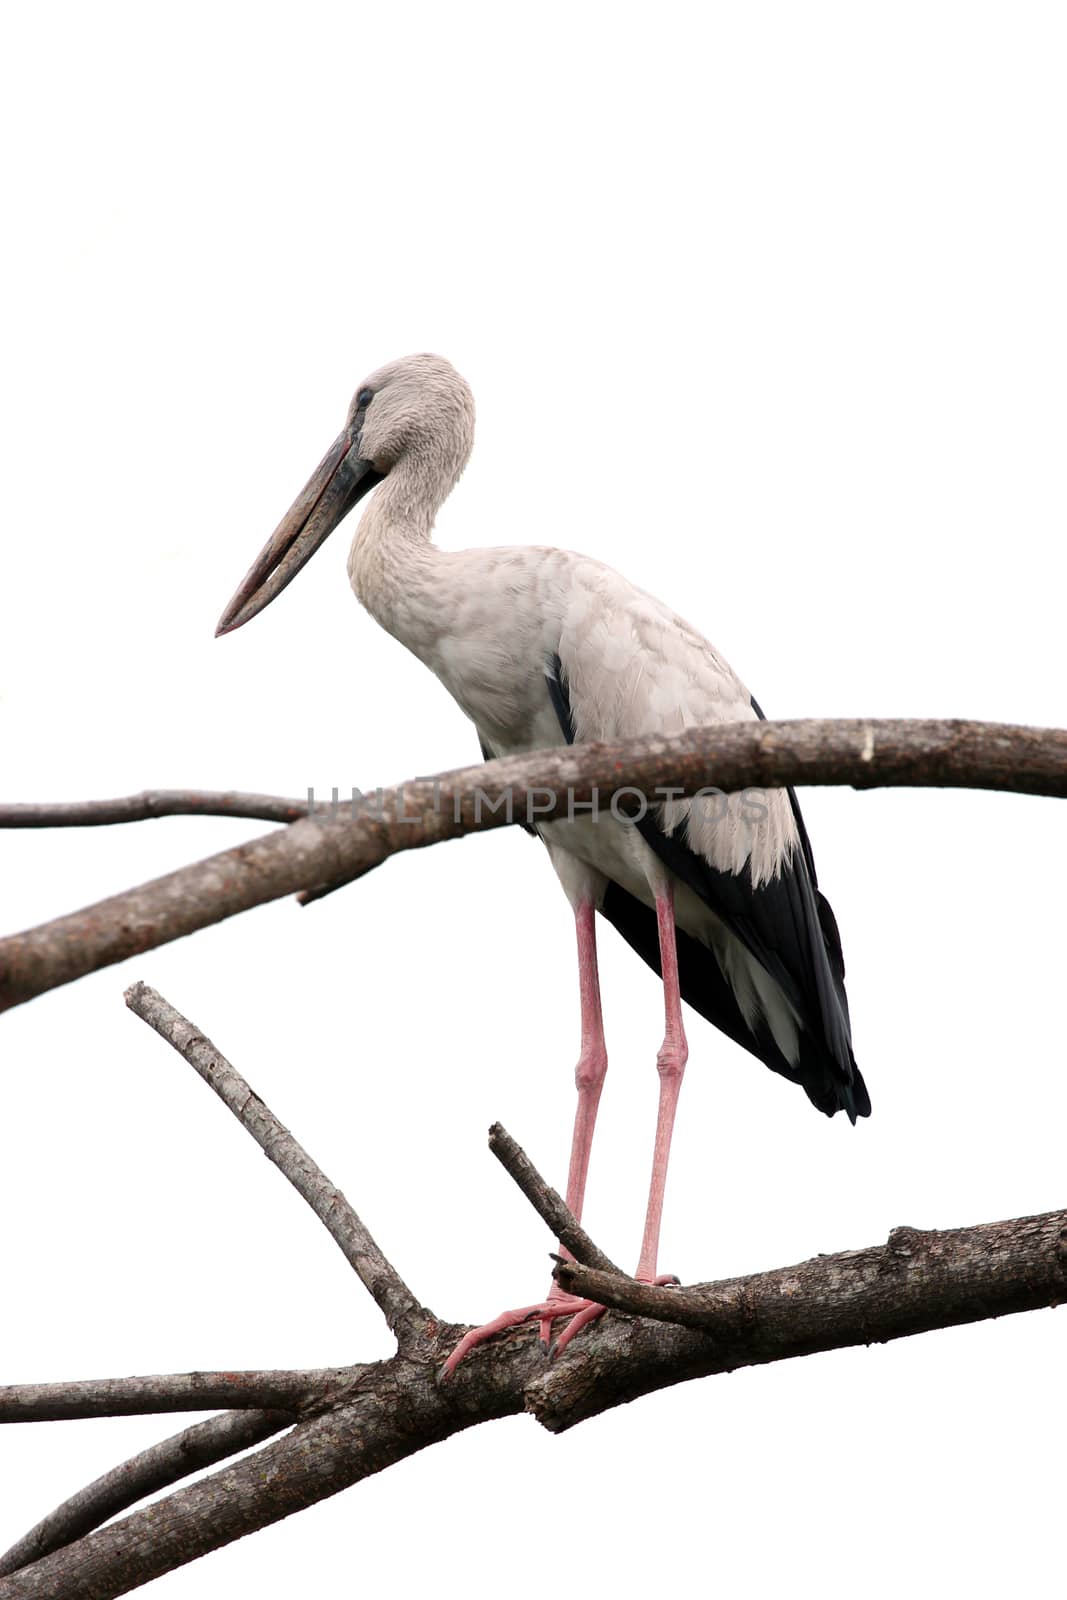 Image of stork perched on tree branch by yod67